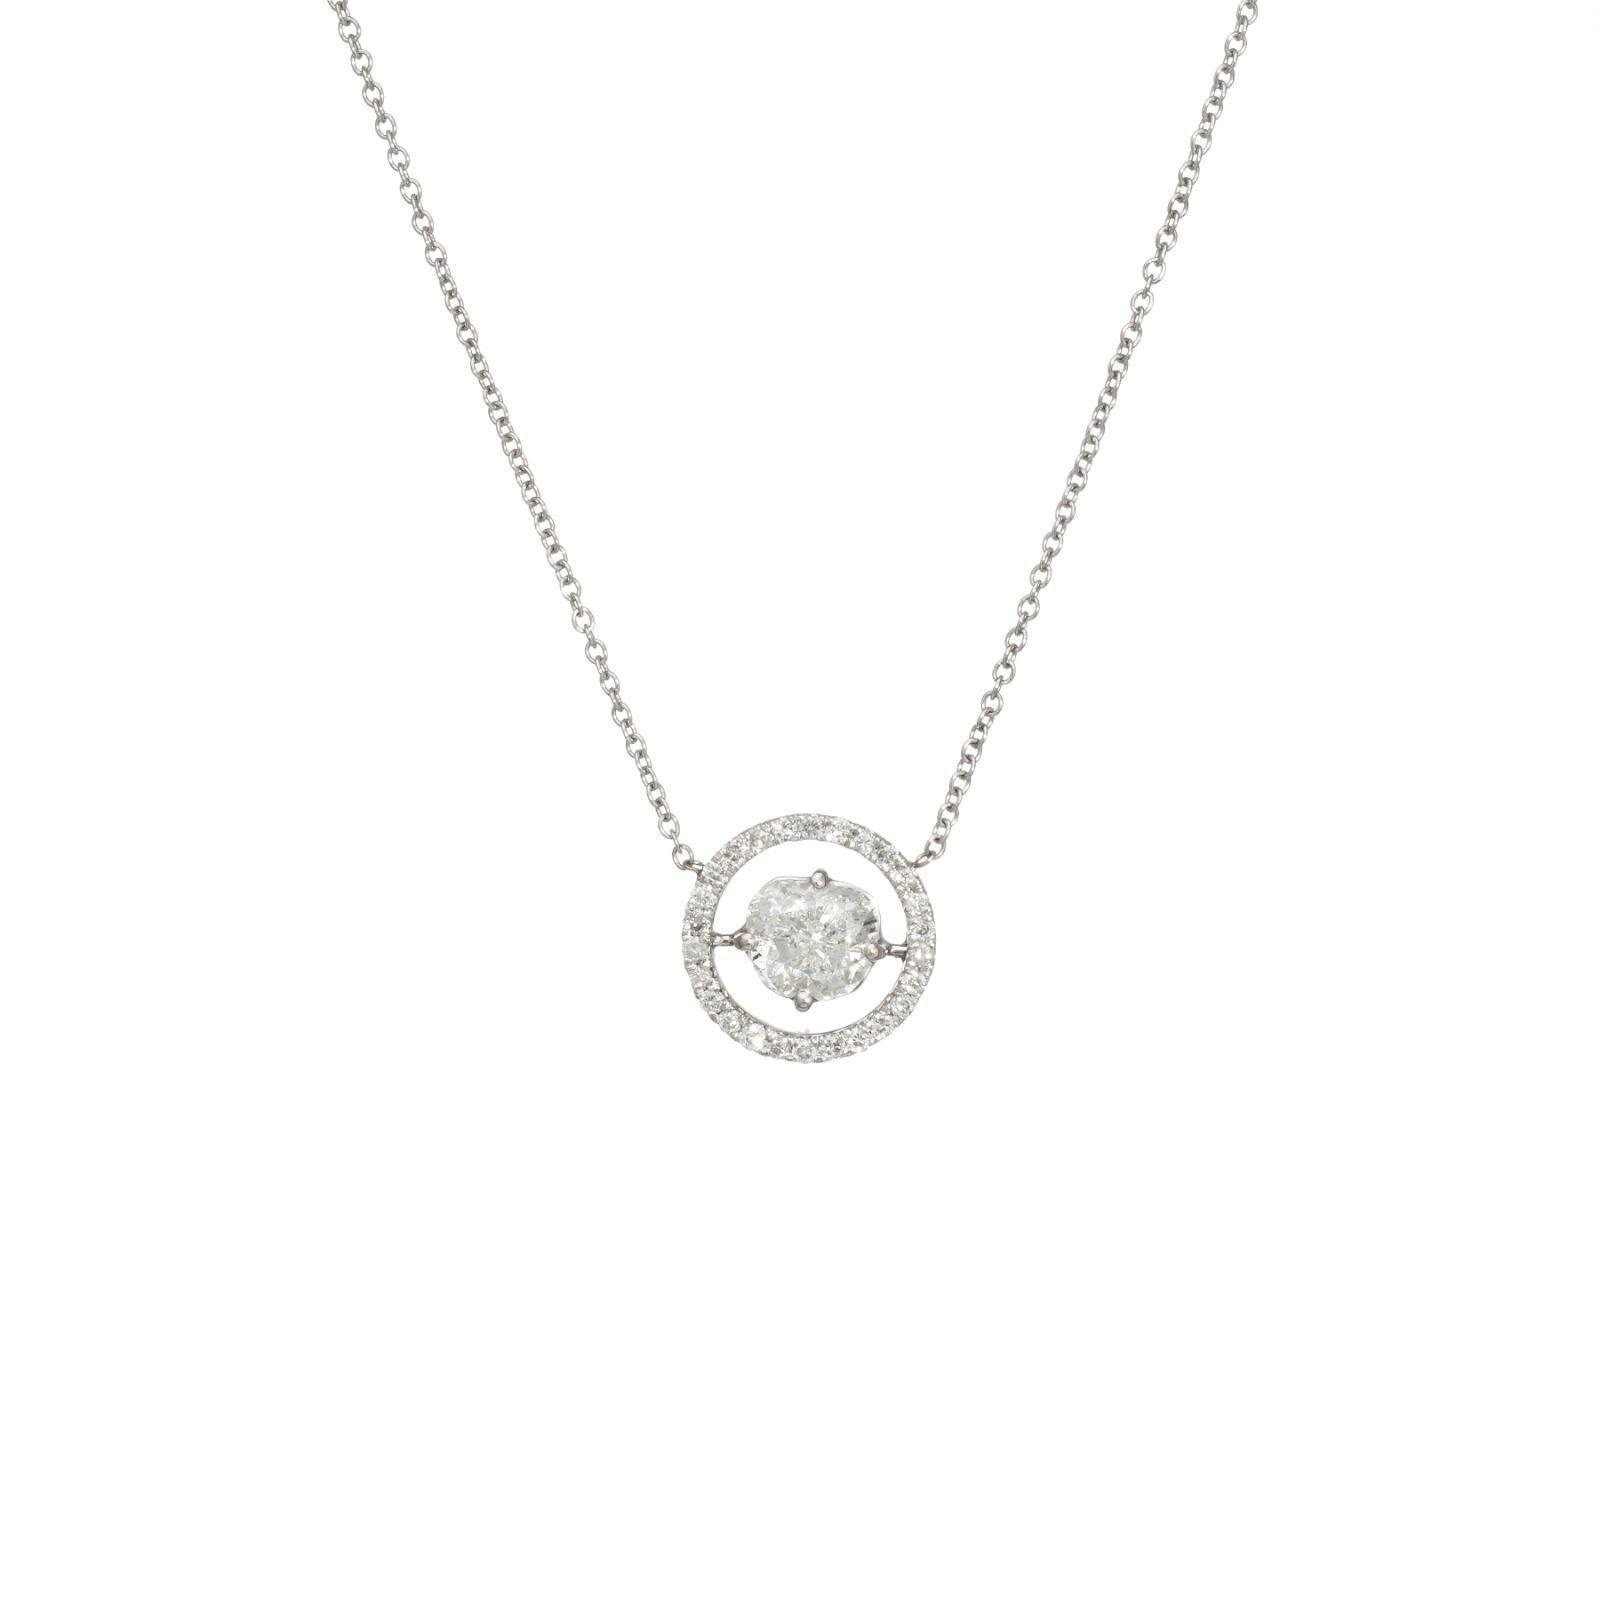 Stylish and finely detailed diamond halo necklace crafted in 14k white gold.  

Faceted brilliant cut (modified heart shape) is estimated at 0.80 carats, accented with 26 diamonds totaling an estimated 0.13 carats (estimated at I-J color and SI1-I2